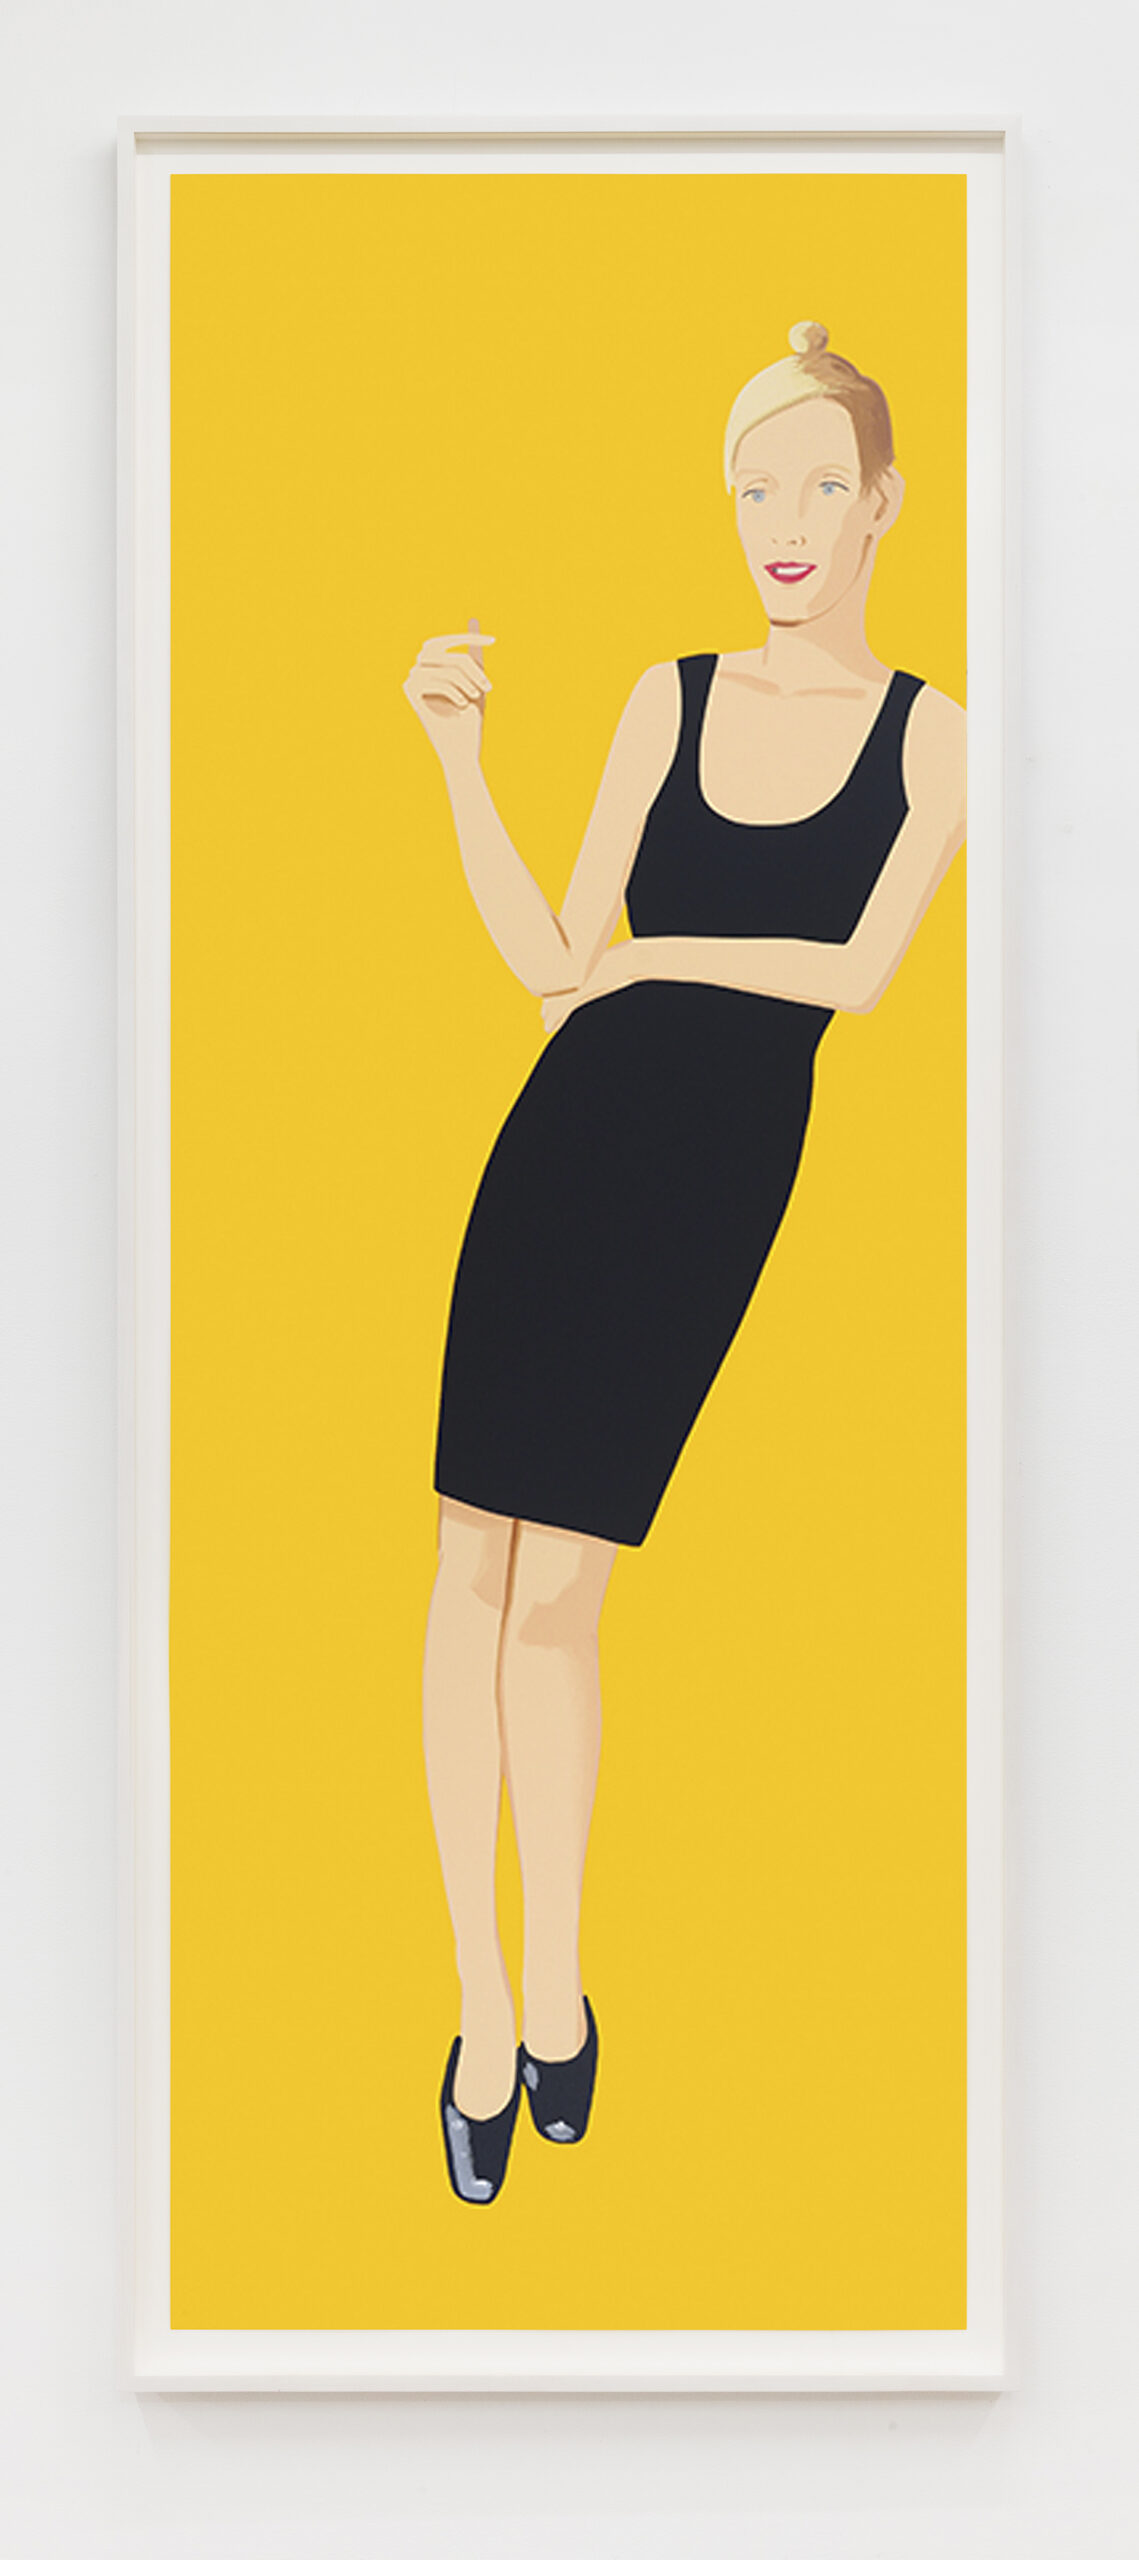 Alex Katz, Black Dress 3 (Oona), 2015 Silkscreen in 31 colors Paper Dimensions: 80 x 30 inches (203.2 x 76.2 cm) Framed Dimensions: 83 3/4 x 33 3/4 inches (212.7 x 85.7 cm) Edition of 35